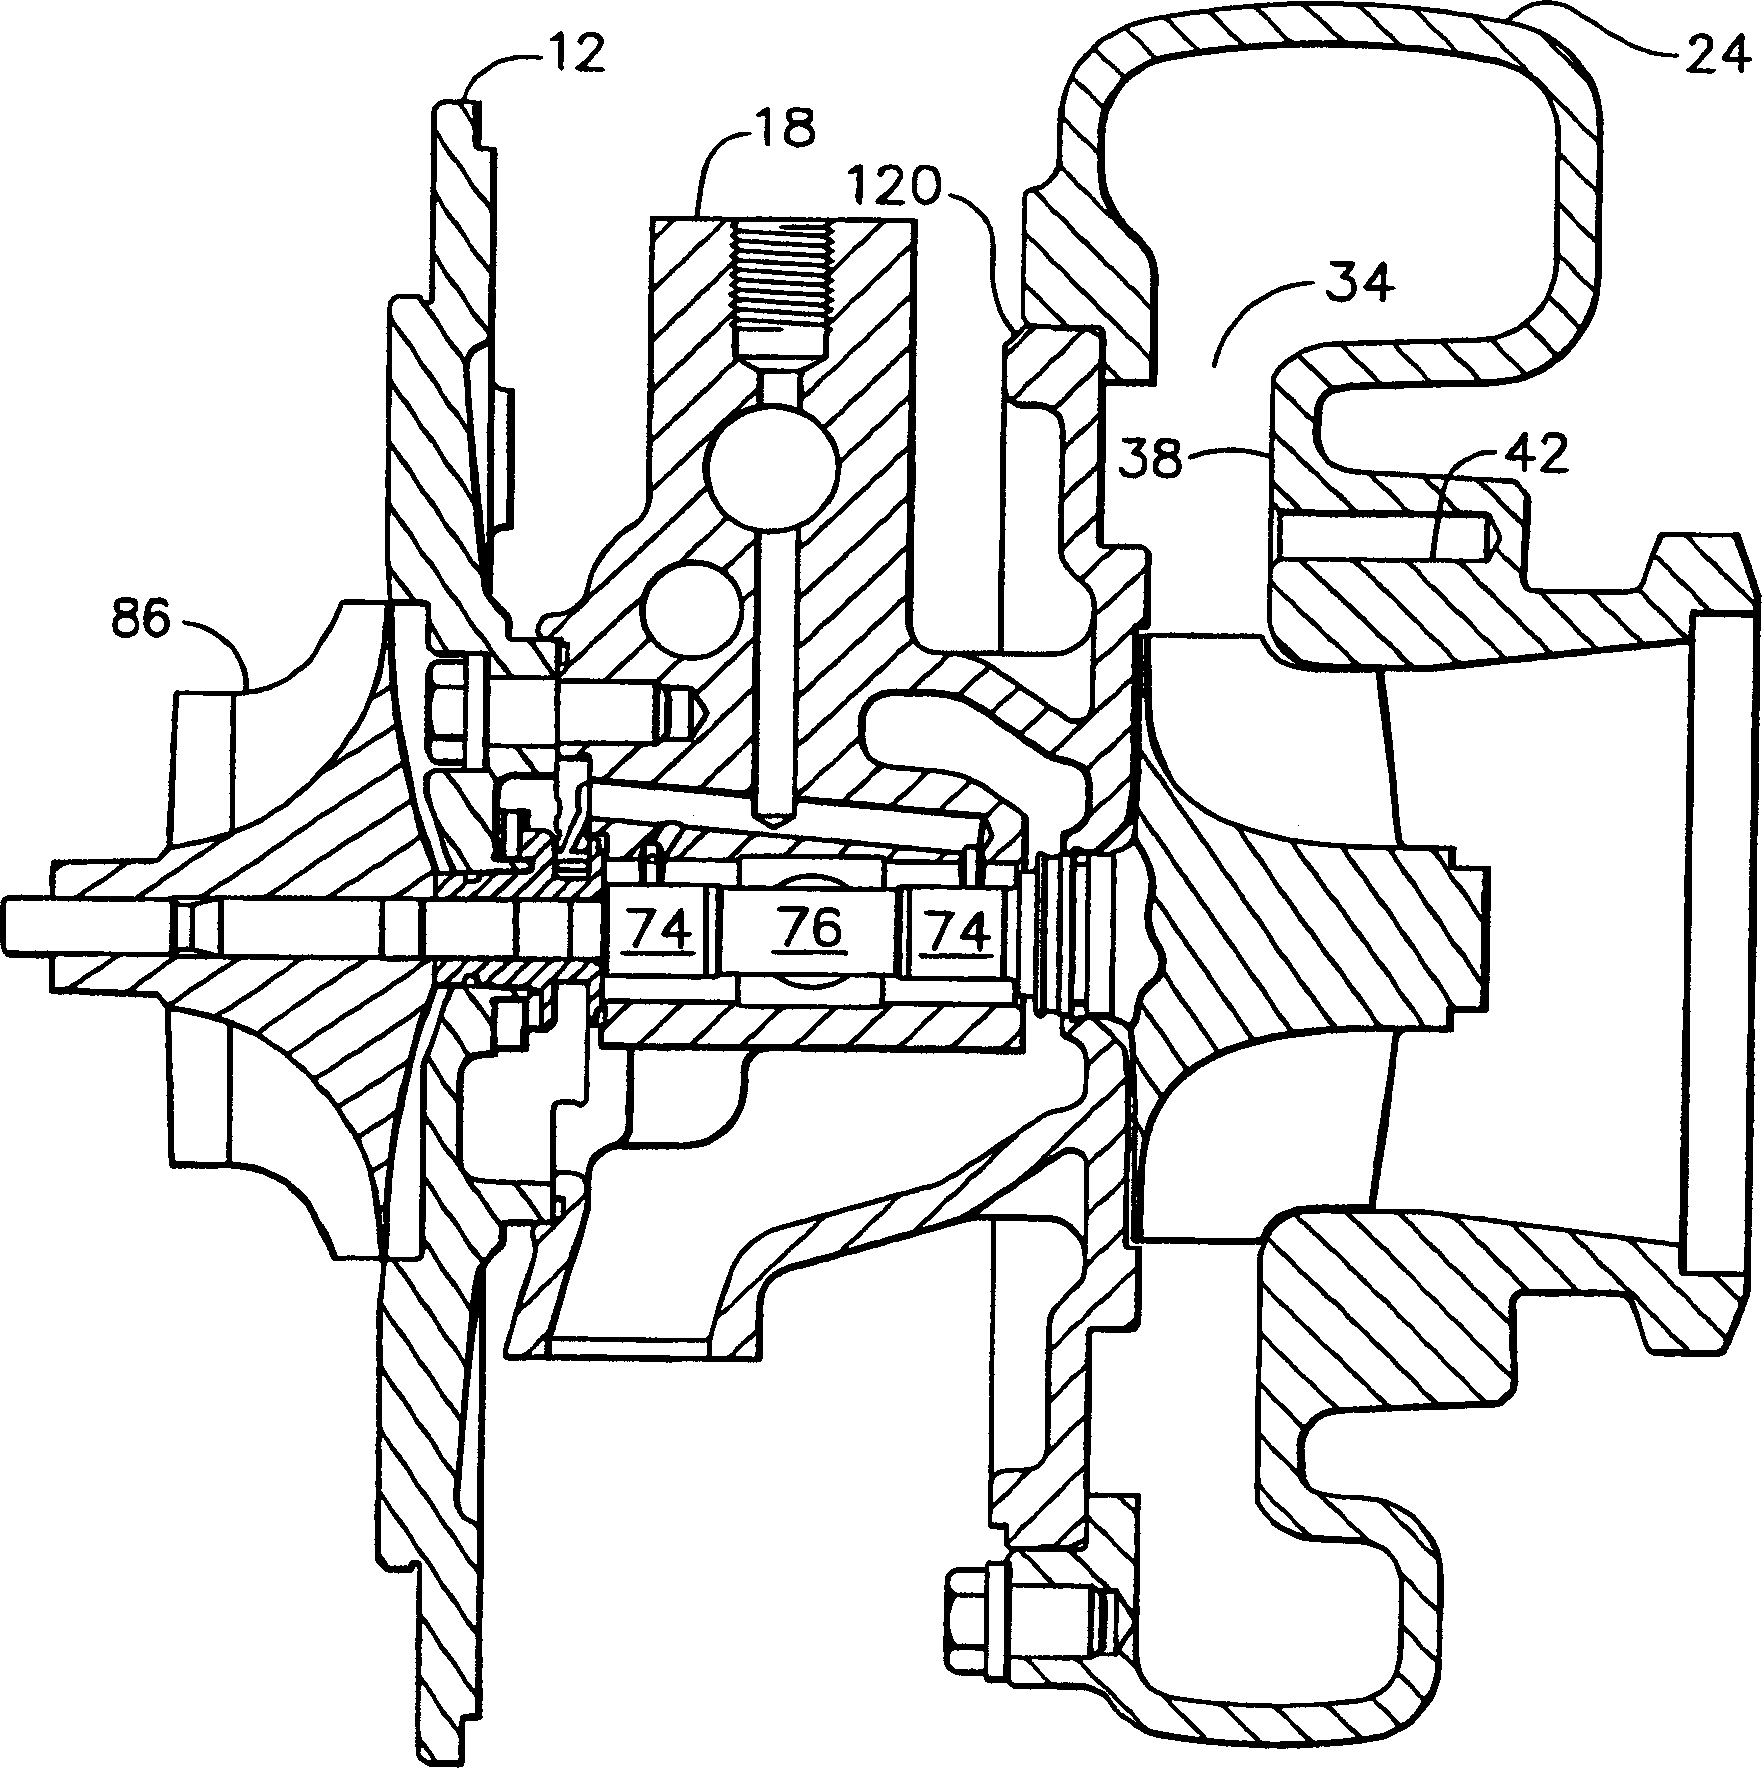 Variable geometry Turbocharger